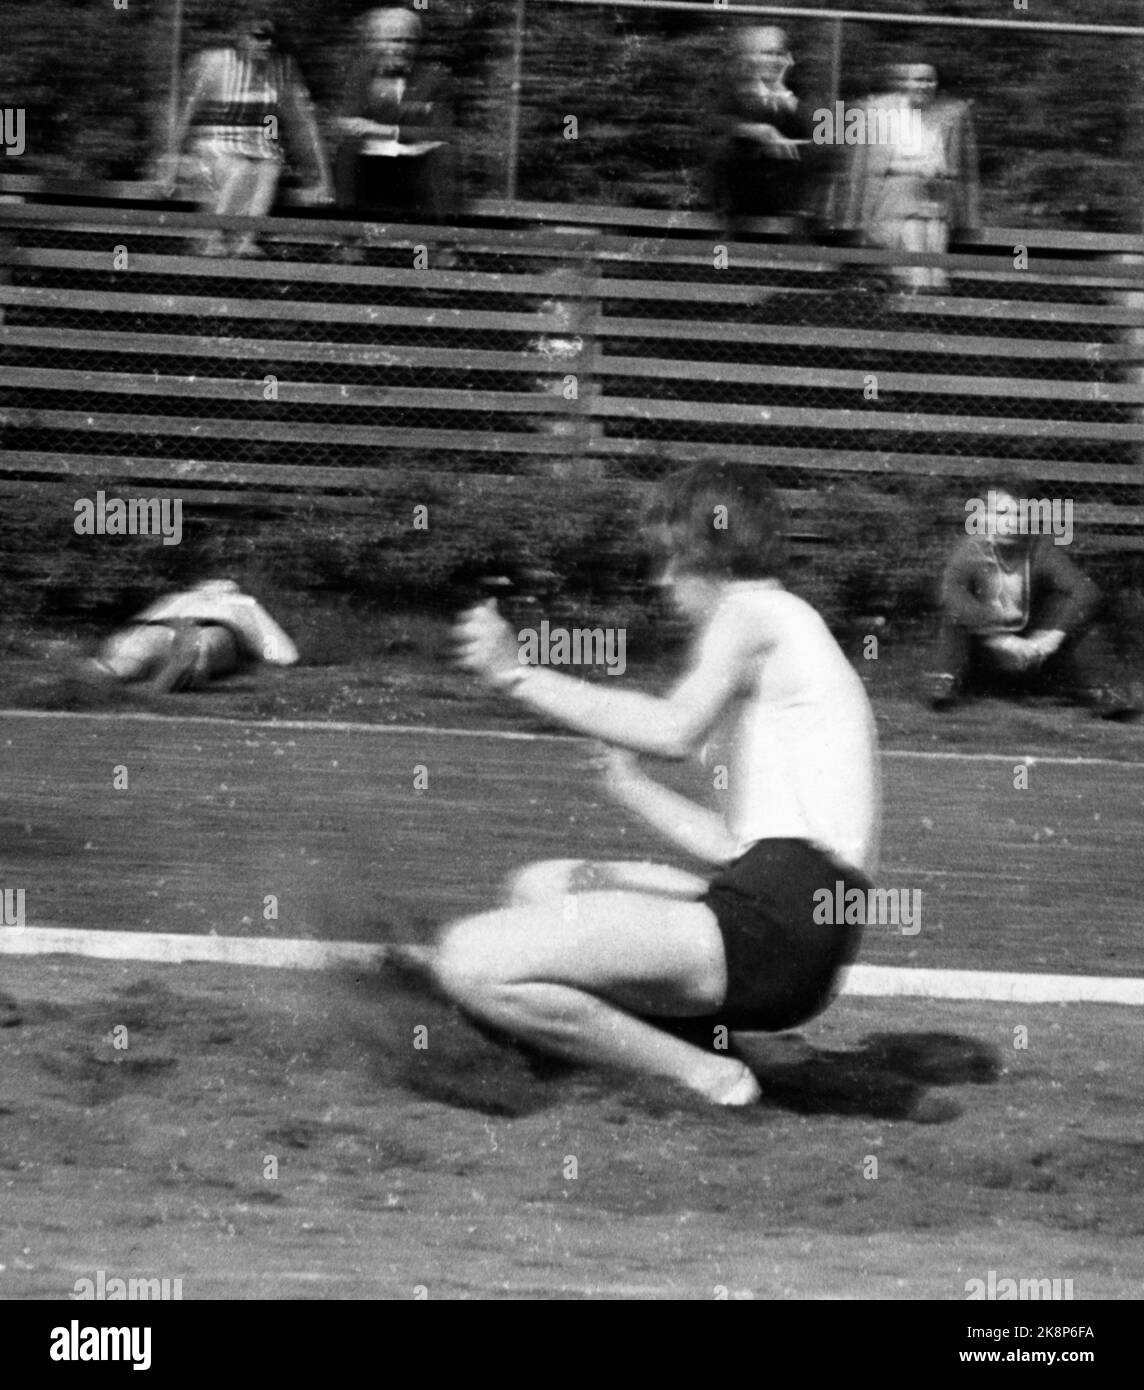 Oslo May 1964 Athletics. One of Norway's great hopes in athletics during the Tolyo Olympics is the long -jumper Berit Tøien, (later Berit Berthelsen) who holds the Nordic record. Here Tøien trains on long jump. Figure 5 in a series of 5 showing the jump in all phases. Action. Photo: Aaserud / Current / NTB Stock Photo